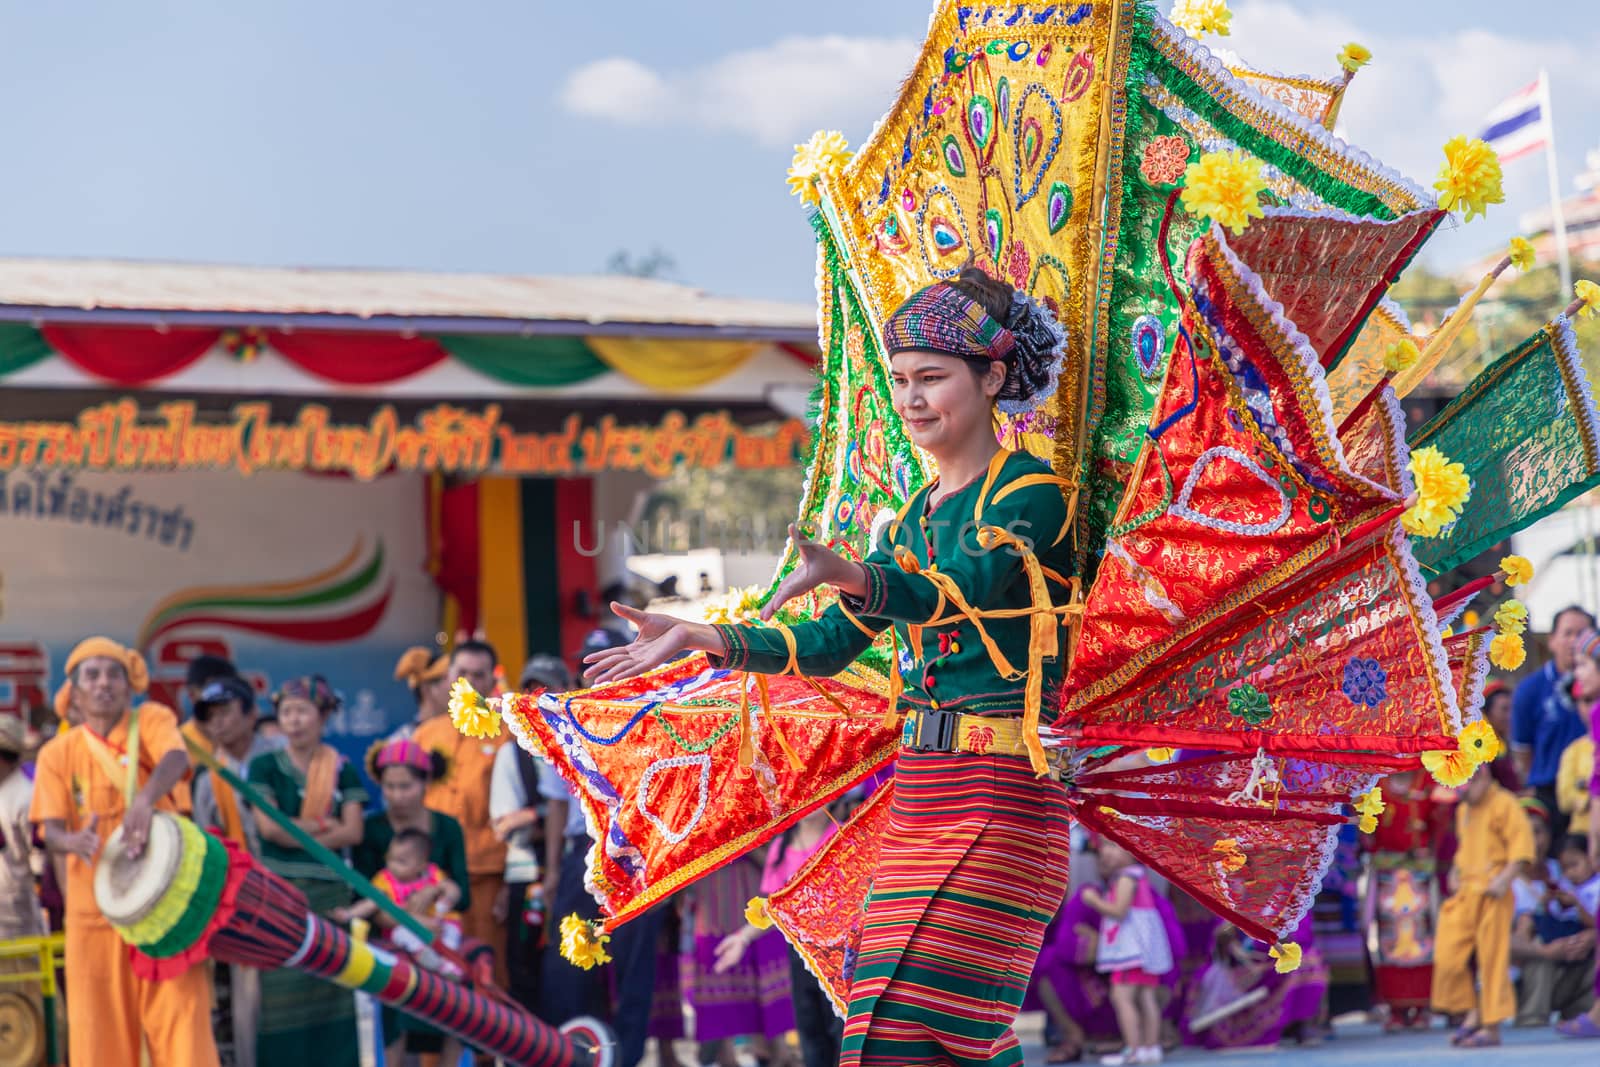 Thoet Thai, Chiang Rai - THAILAND, November 27, 2019 : Beauty woman of Shan or Tai Yai (ethnic group living in parts of Myanmar and Thailand) in tribal dress on Shan New Year celebrations.